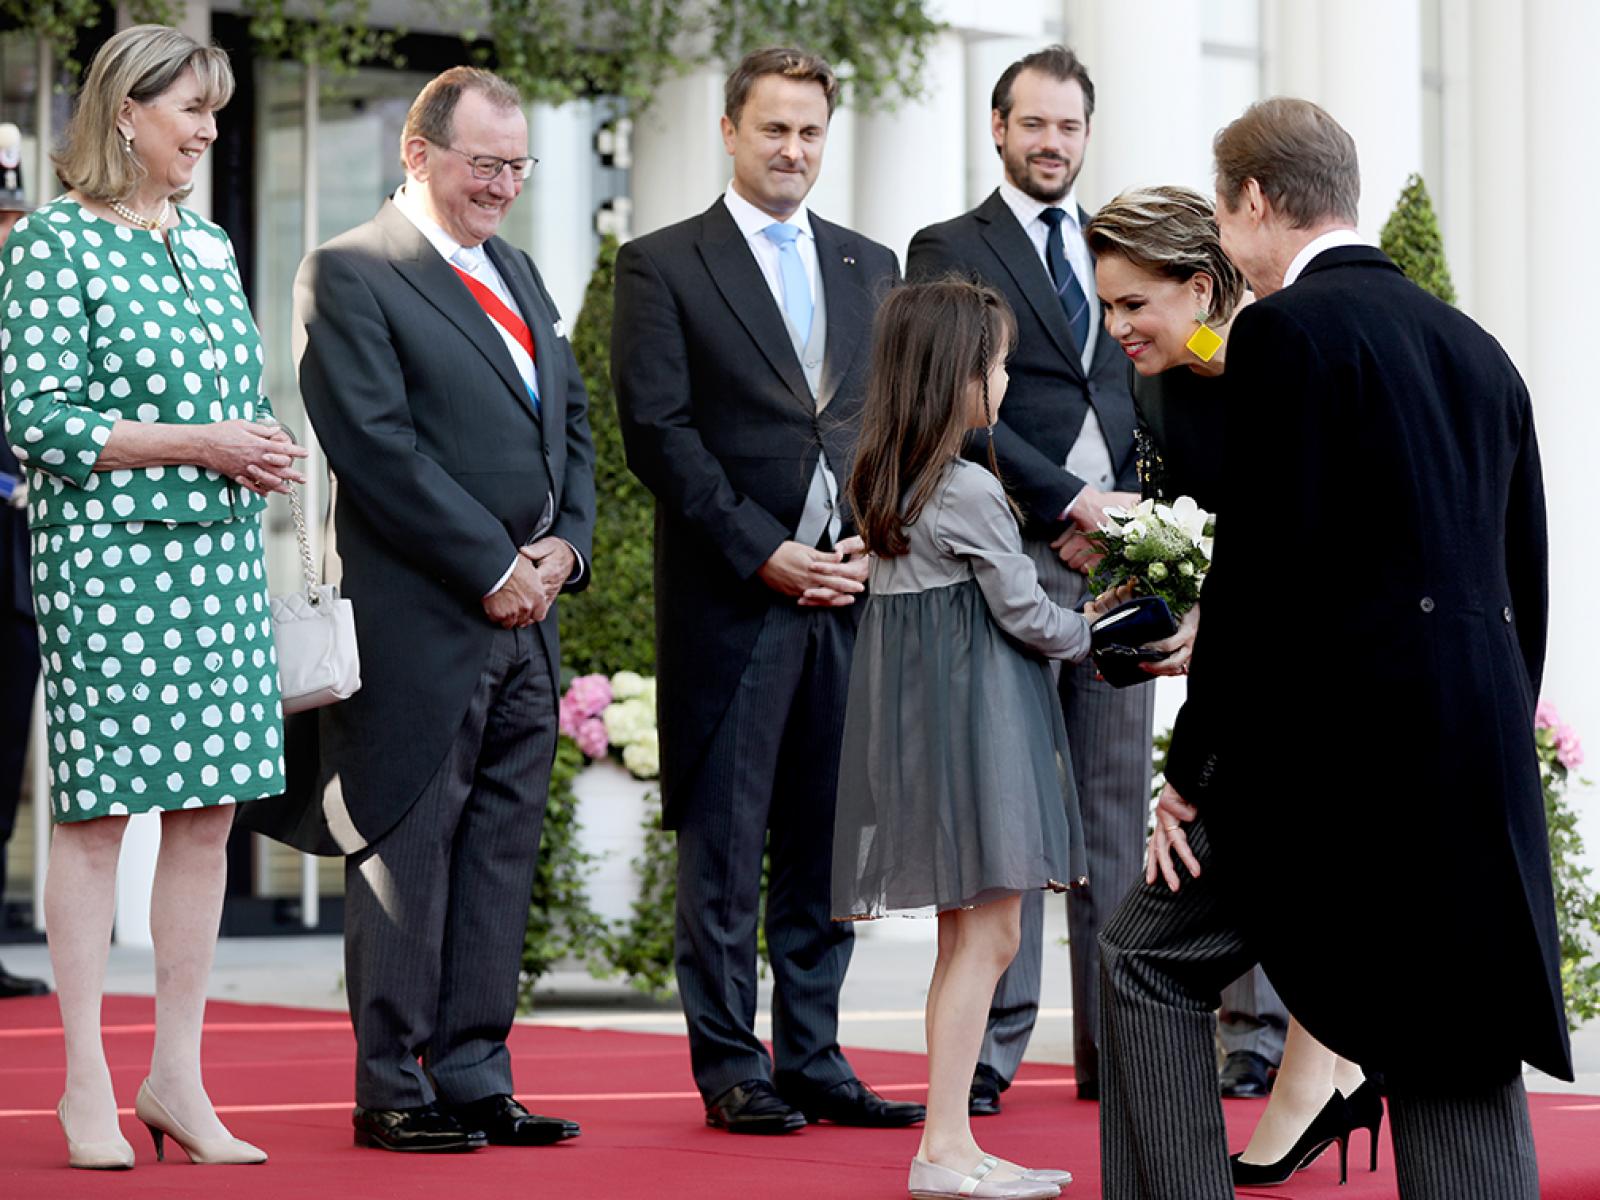 Ceremony of the National Day at the Philharmonie - arrival of the Grand Duke and Grand Duchess 